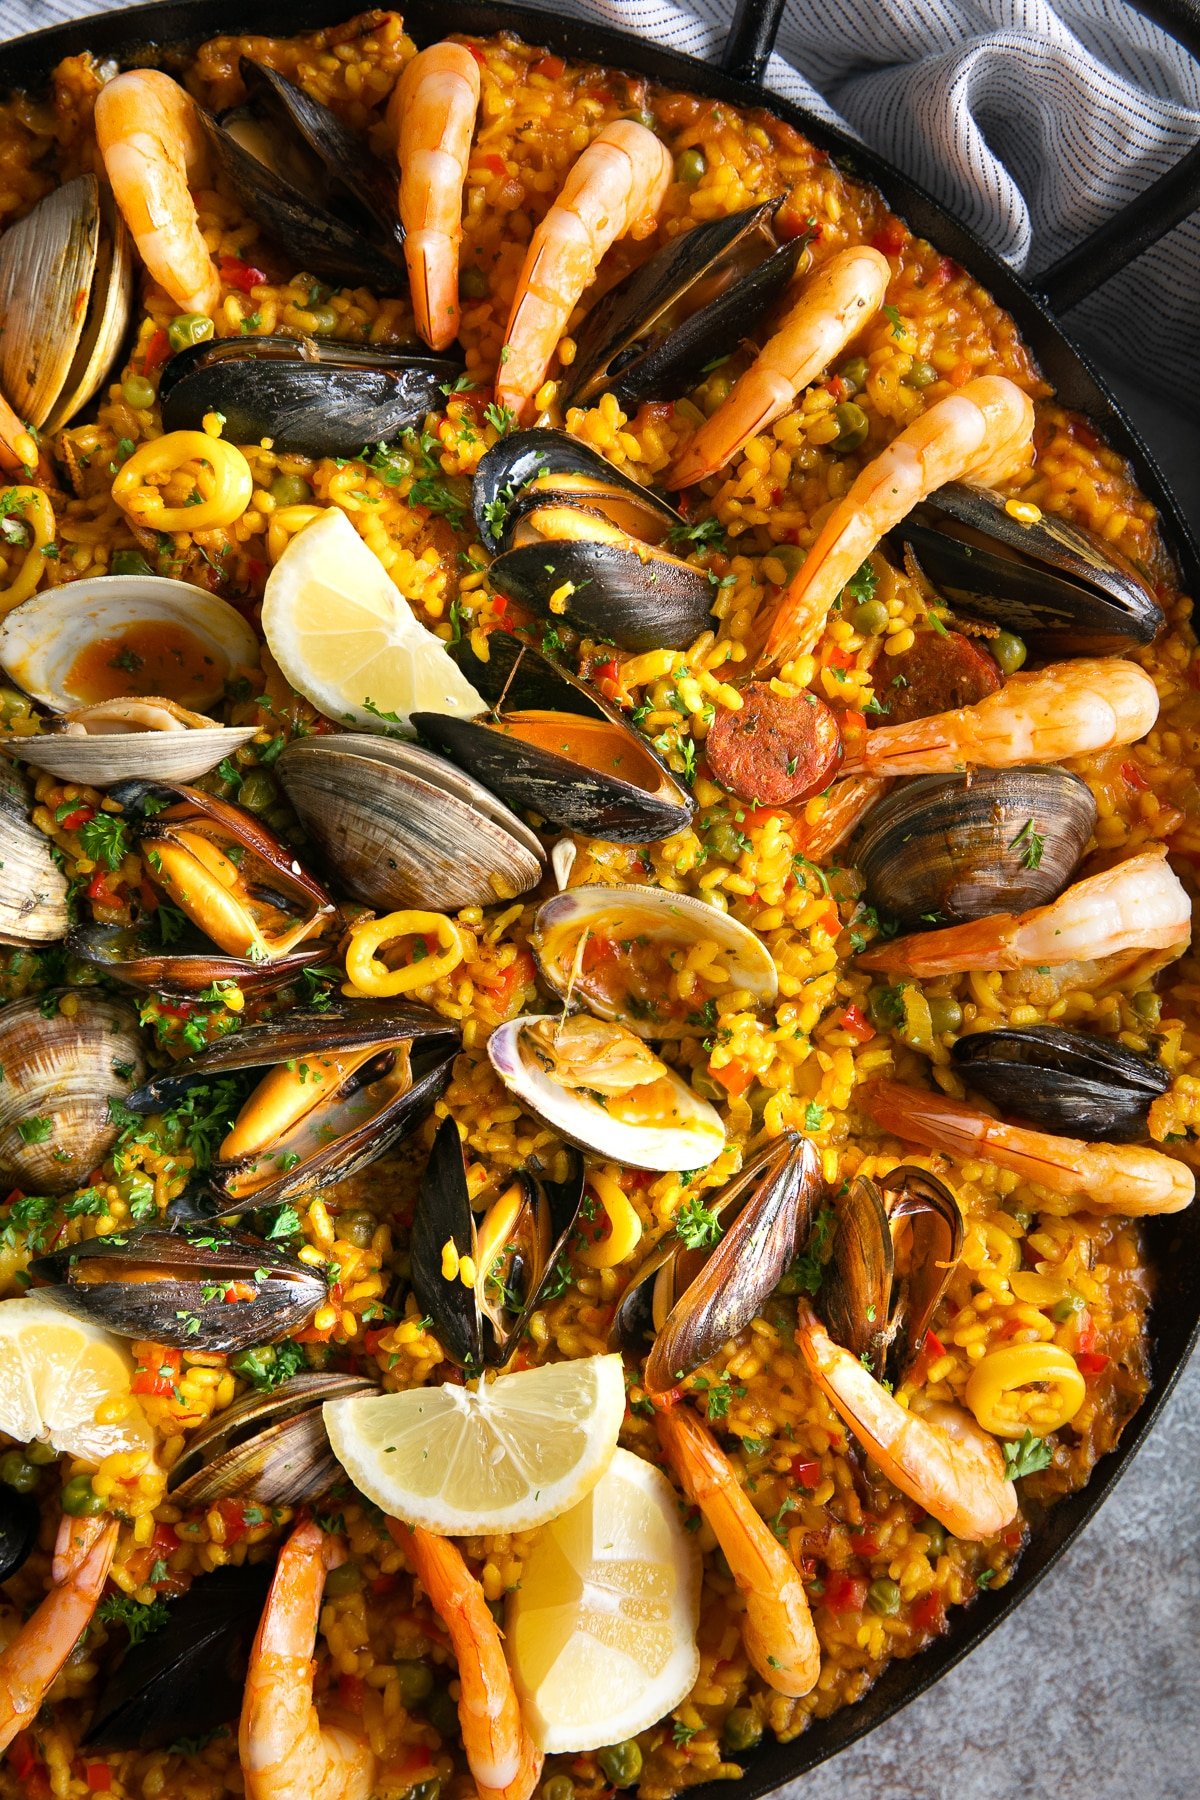 Stovetop Paella Mixta for Four With Pork, Chicken, and Shrimp Recipe